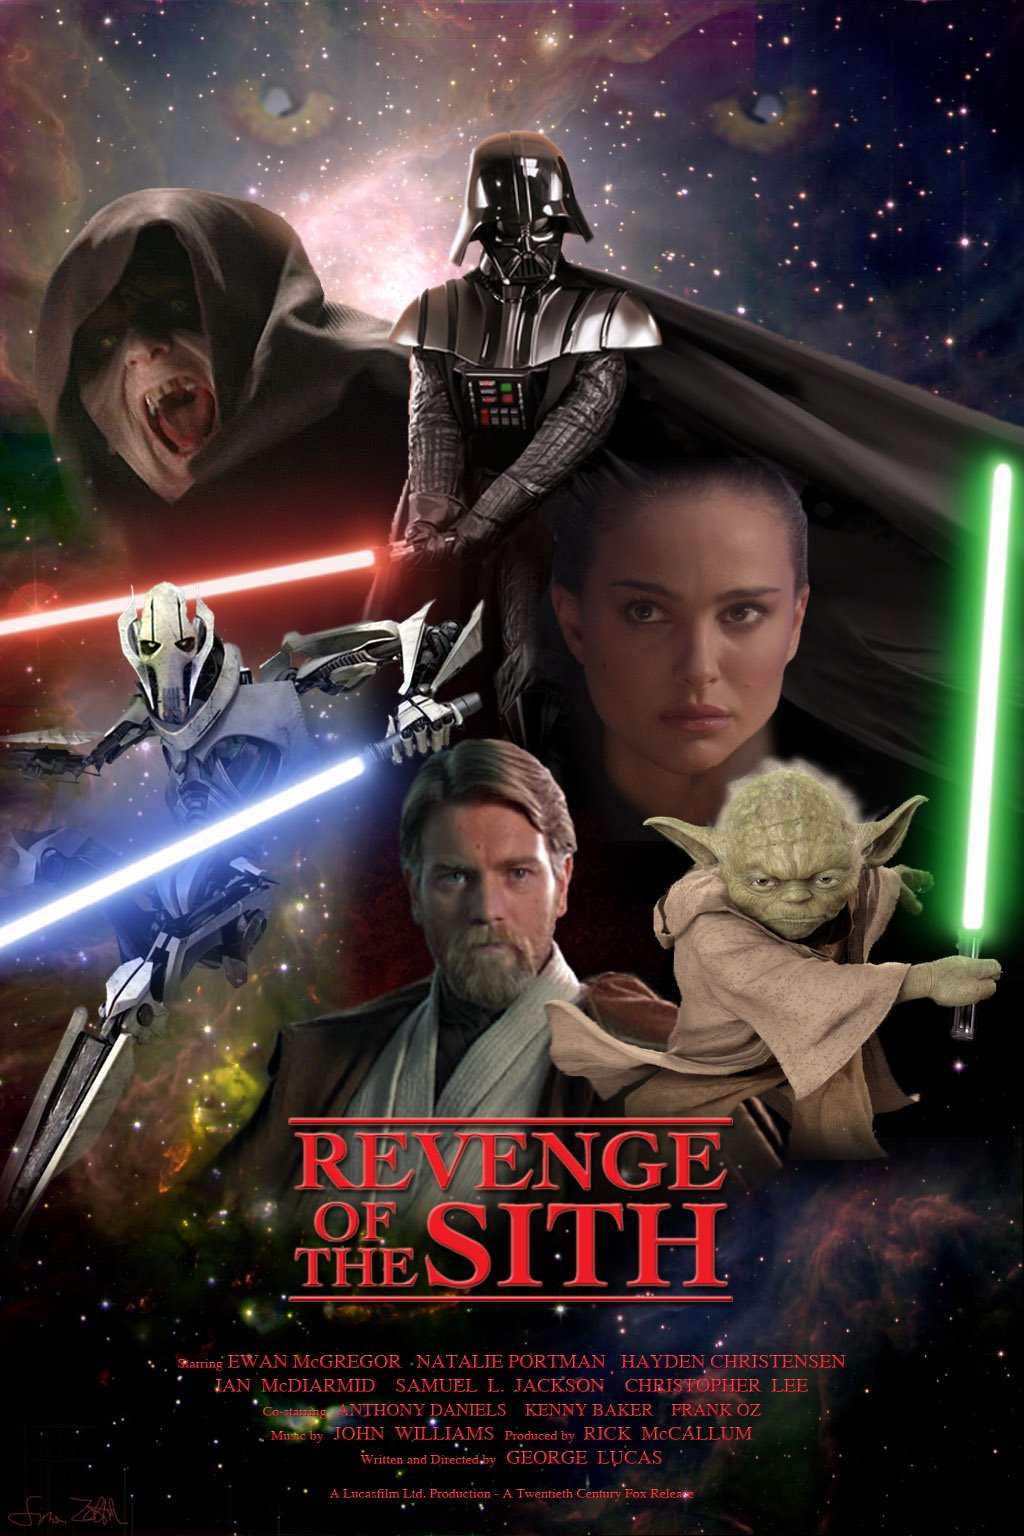 instal the last version for windows Star Wars Ep. III: Revenge of the Sith